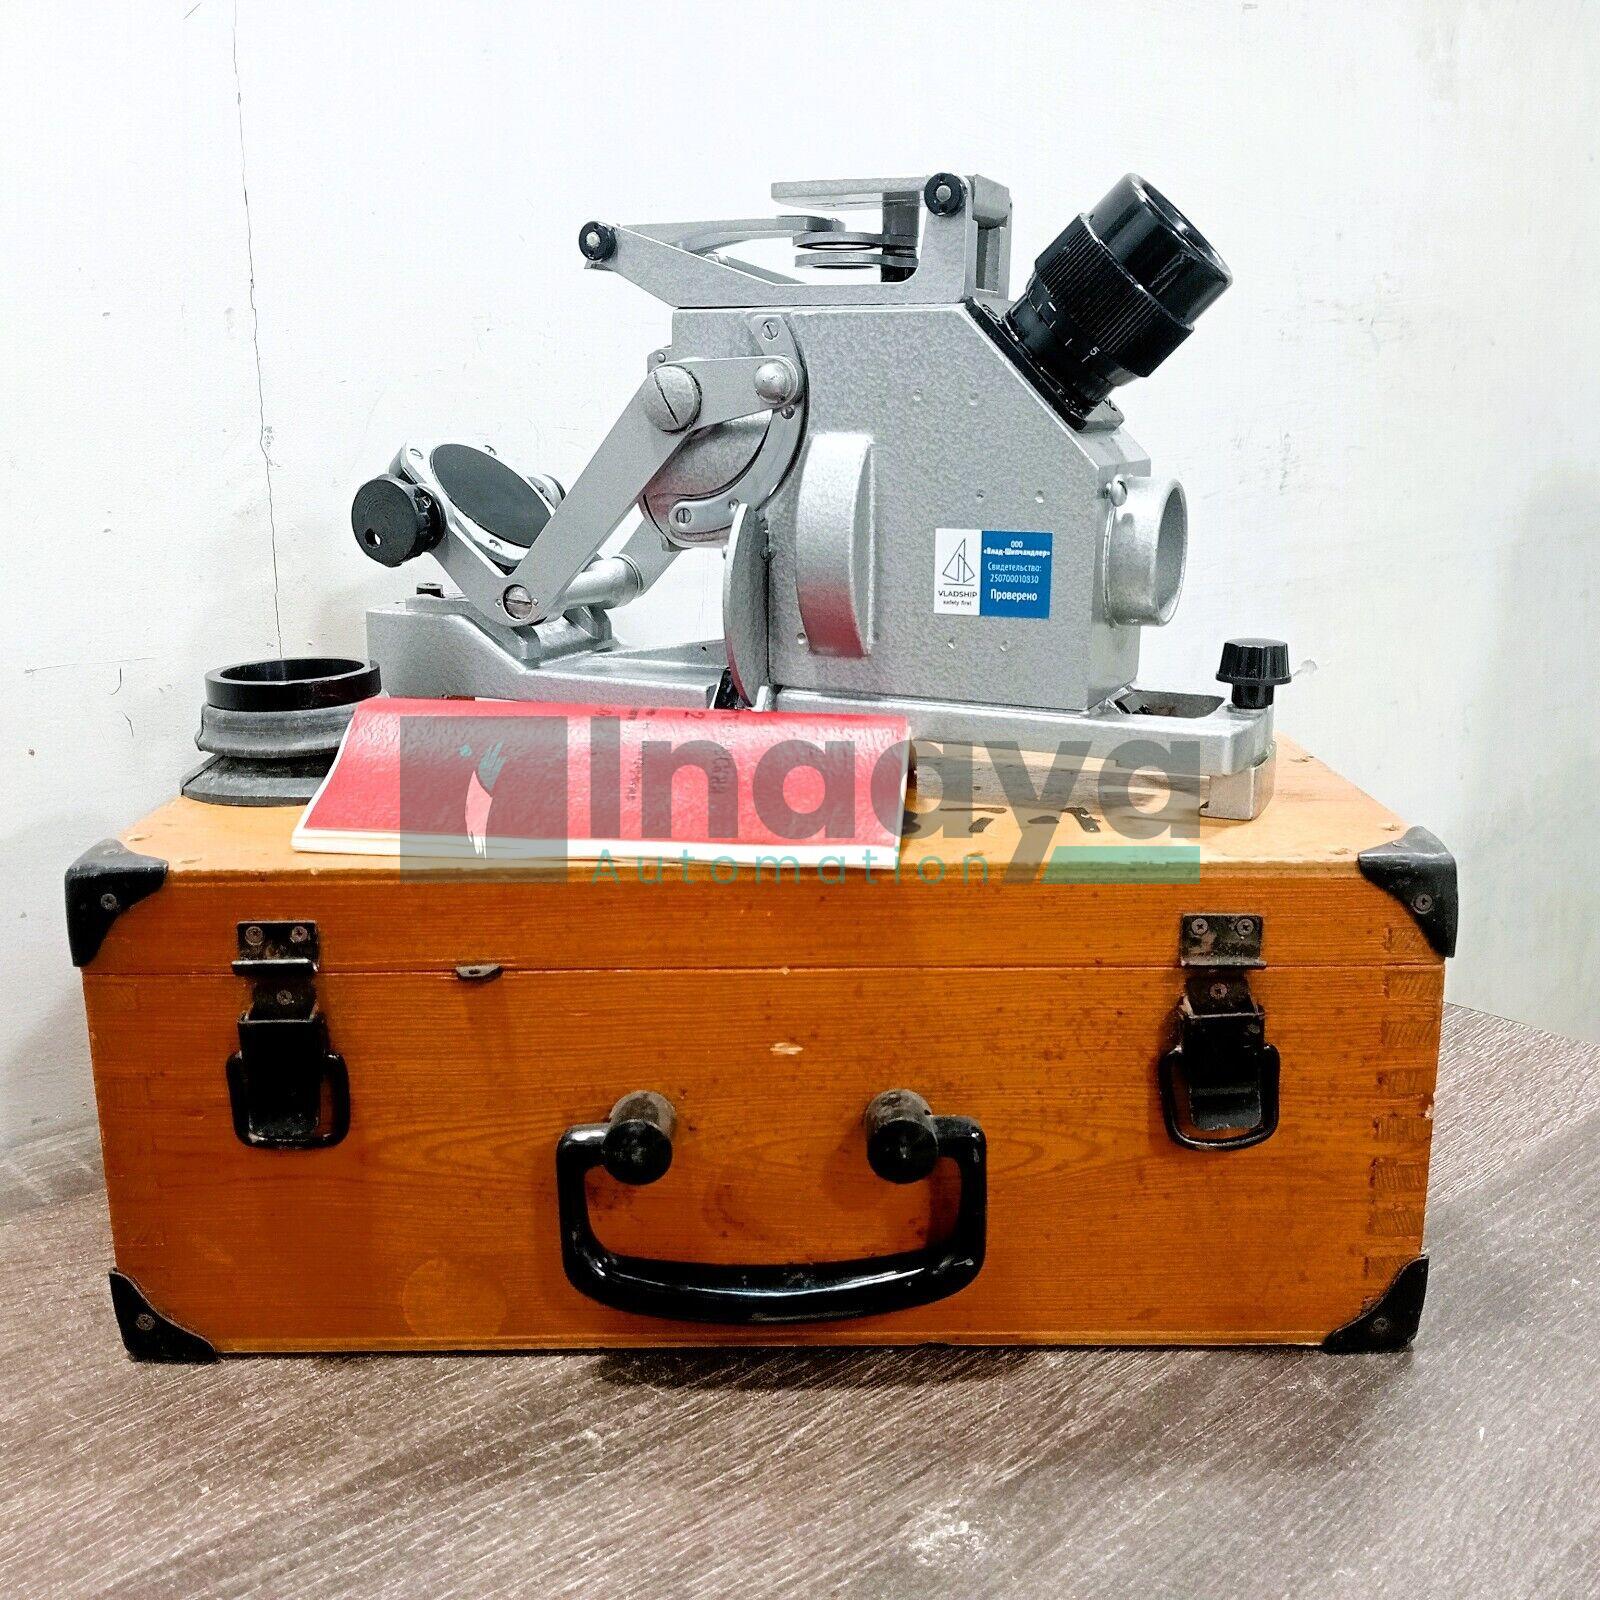 OPTICAL DIRECTION FINDER PGK-2 FOR DIRECTION FINDING OF COASTAL OBJECTS